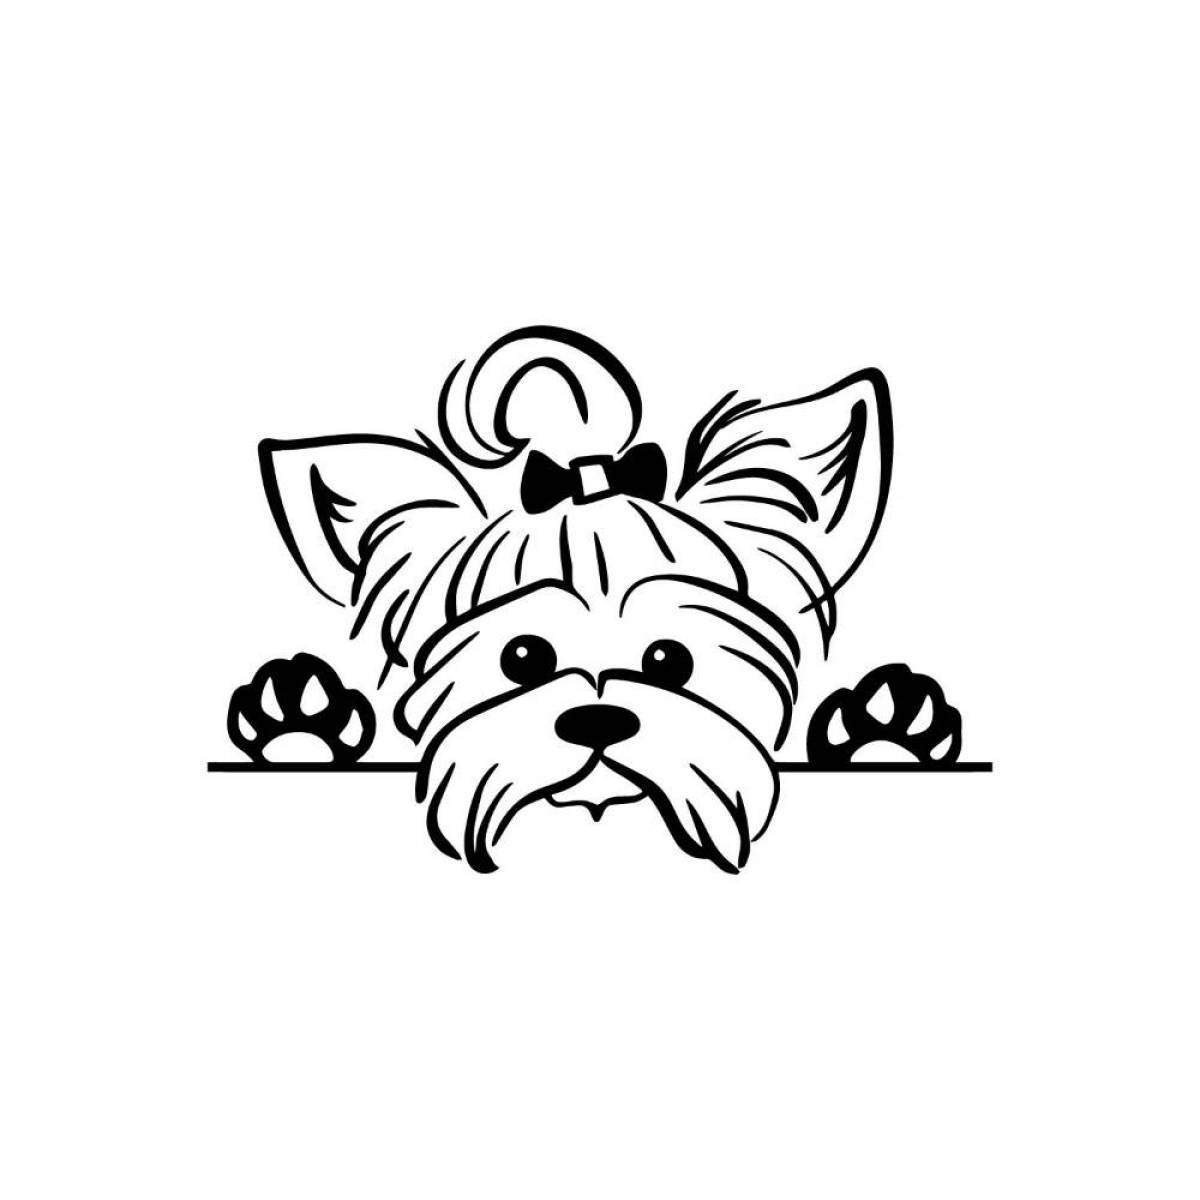 Sparkling Yorkshire Terrier coloring page